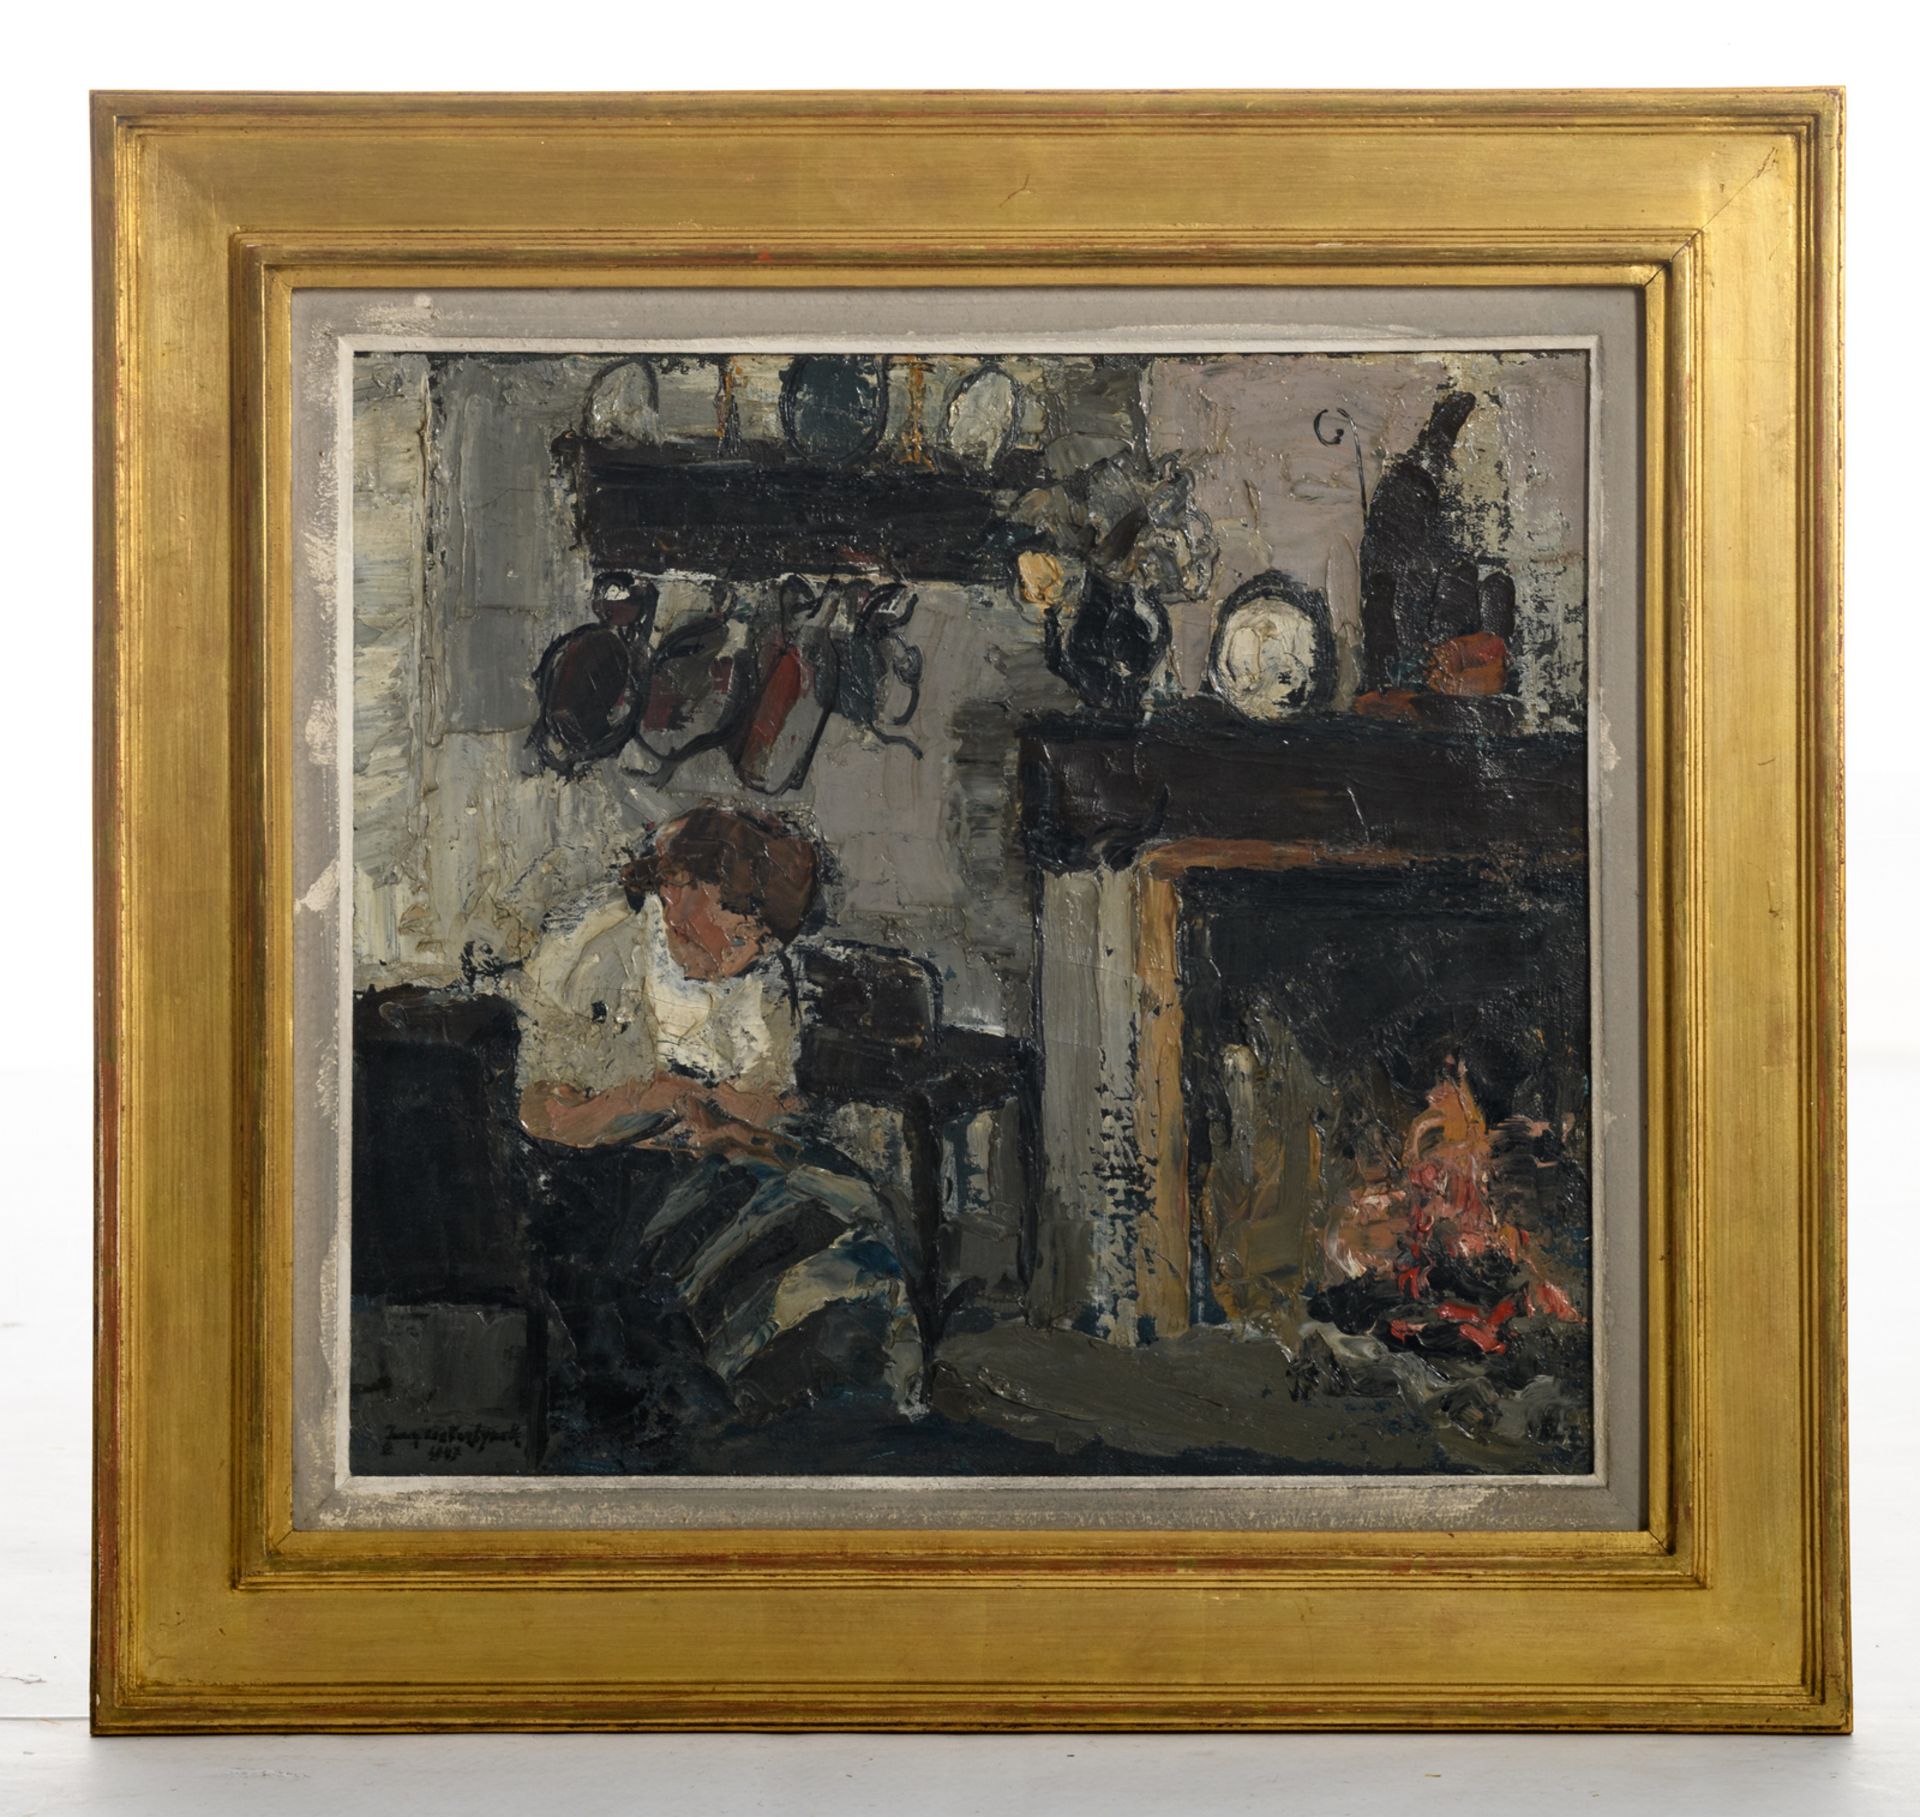 Oosterlynck J., an interior view with a hand working lady, oil on canvas, dated 1947, 40 x 44,5 cm - Image 2 of 4